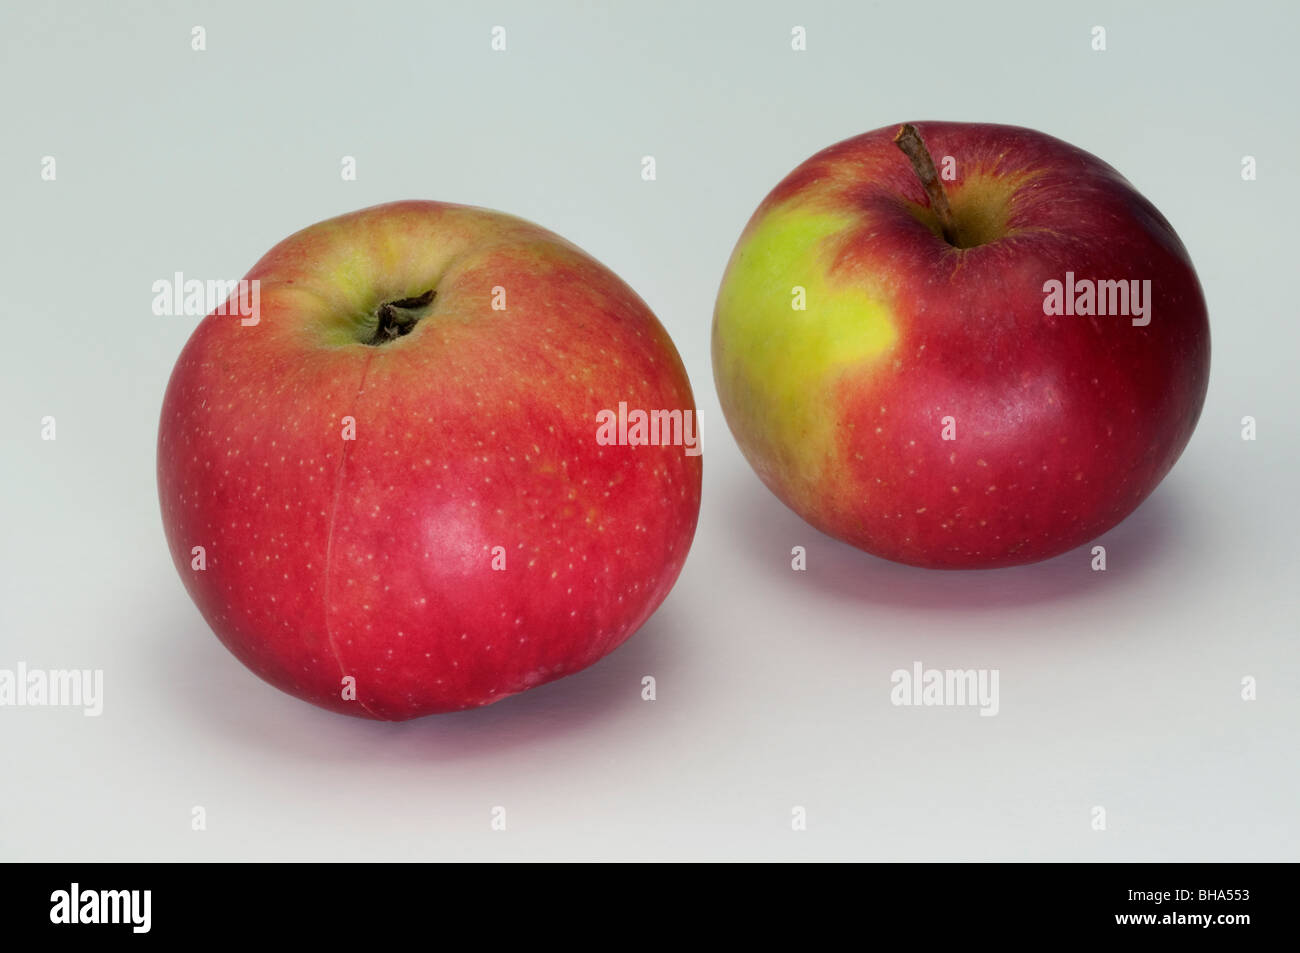 Domestic Apple (Malus domestica), variety: Danziger Kant, two apples, studio picture. Stock Photo